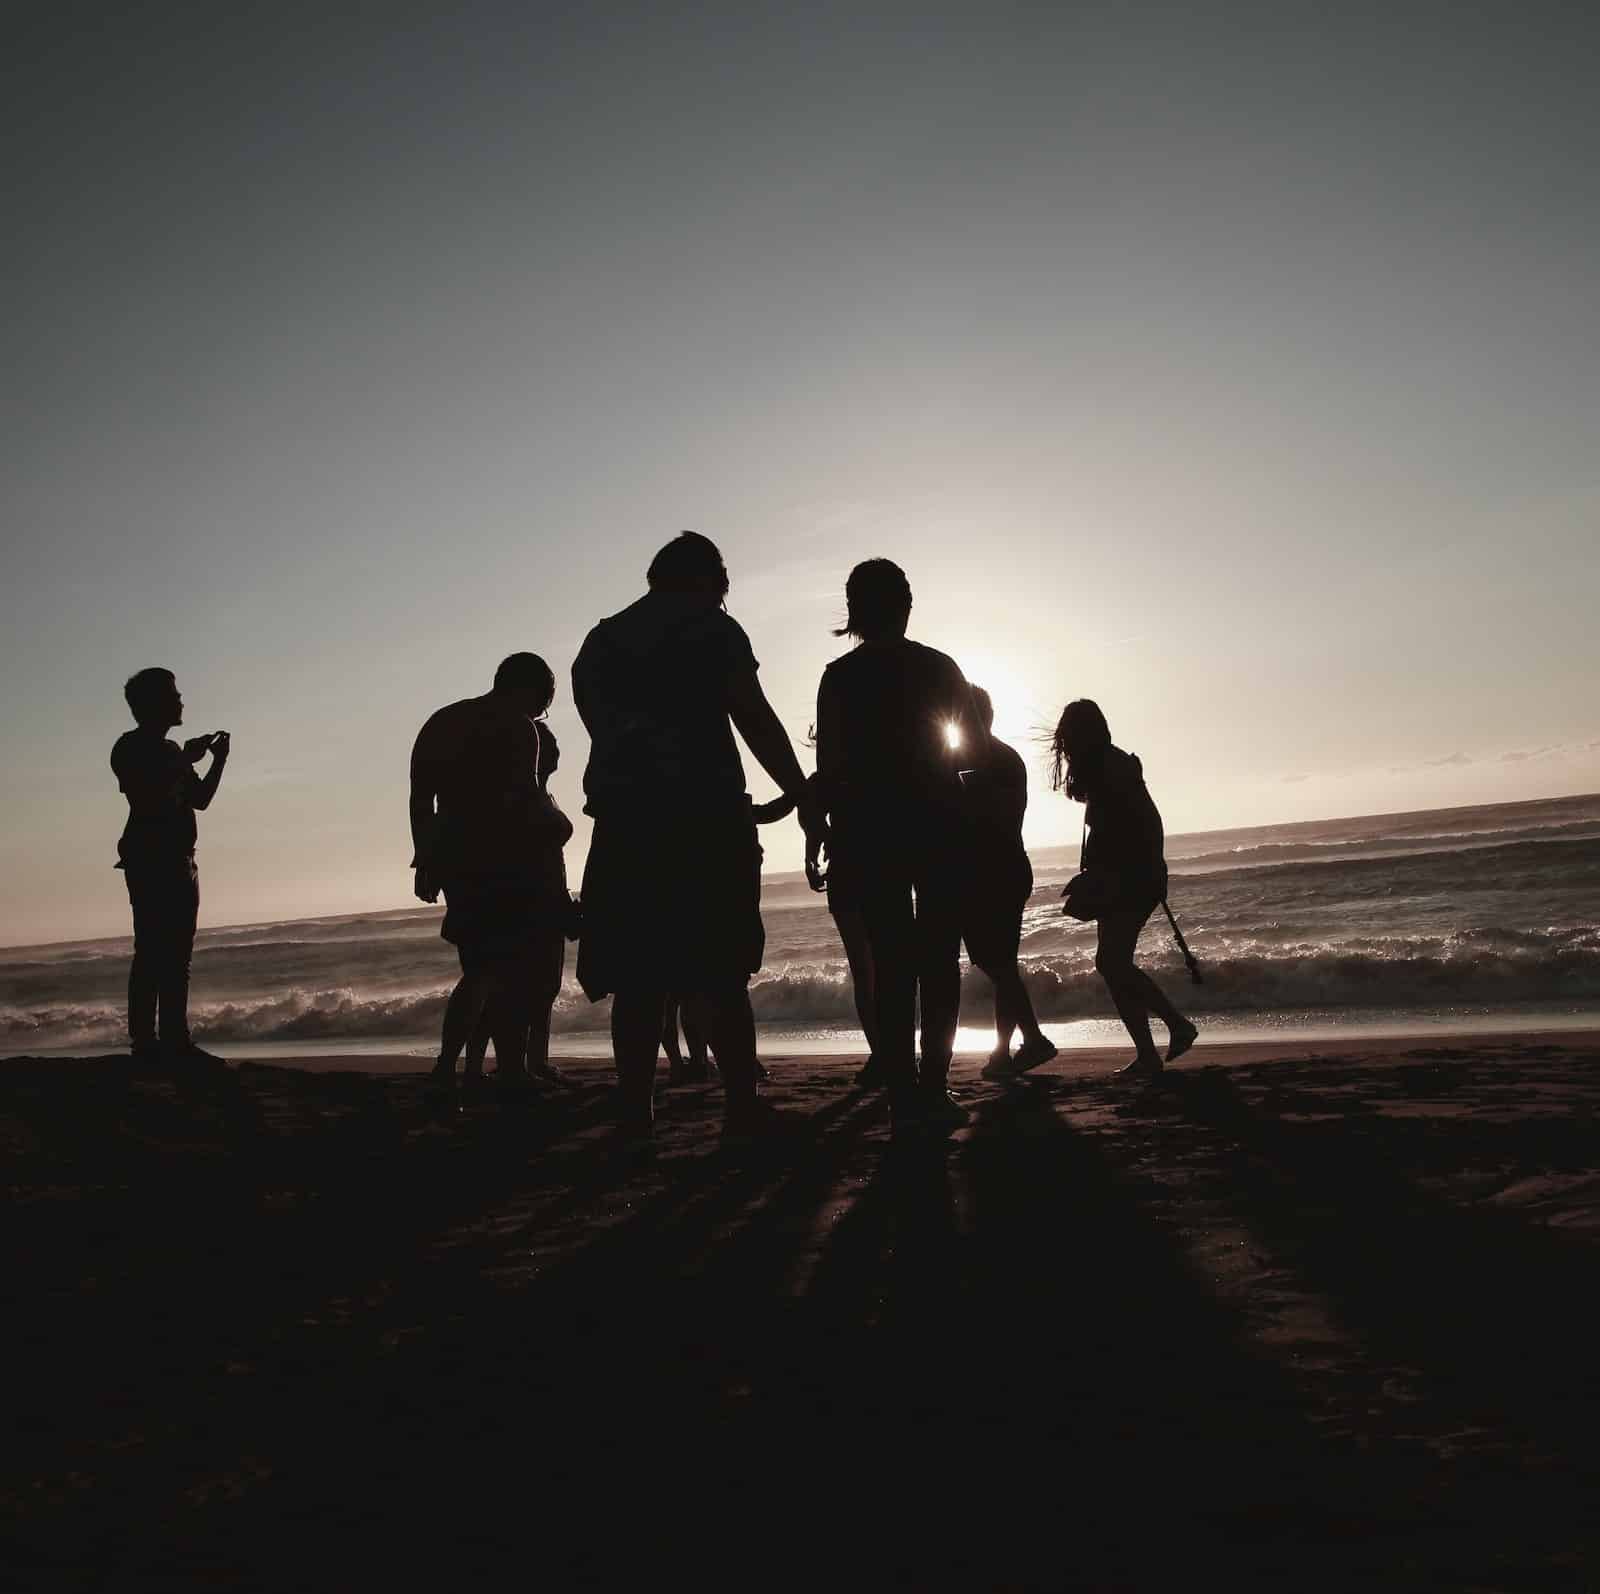 A family is shown as silhouettes at the beach by the ocean.